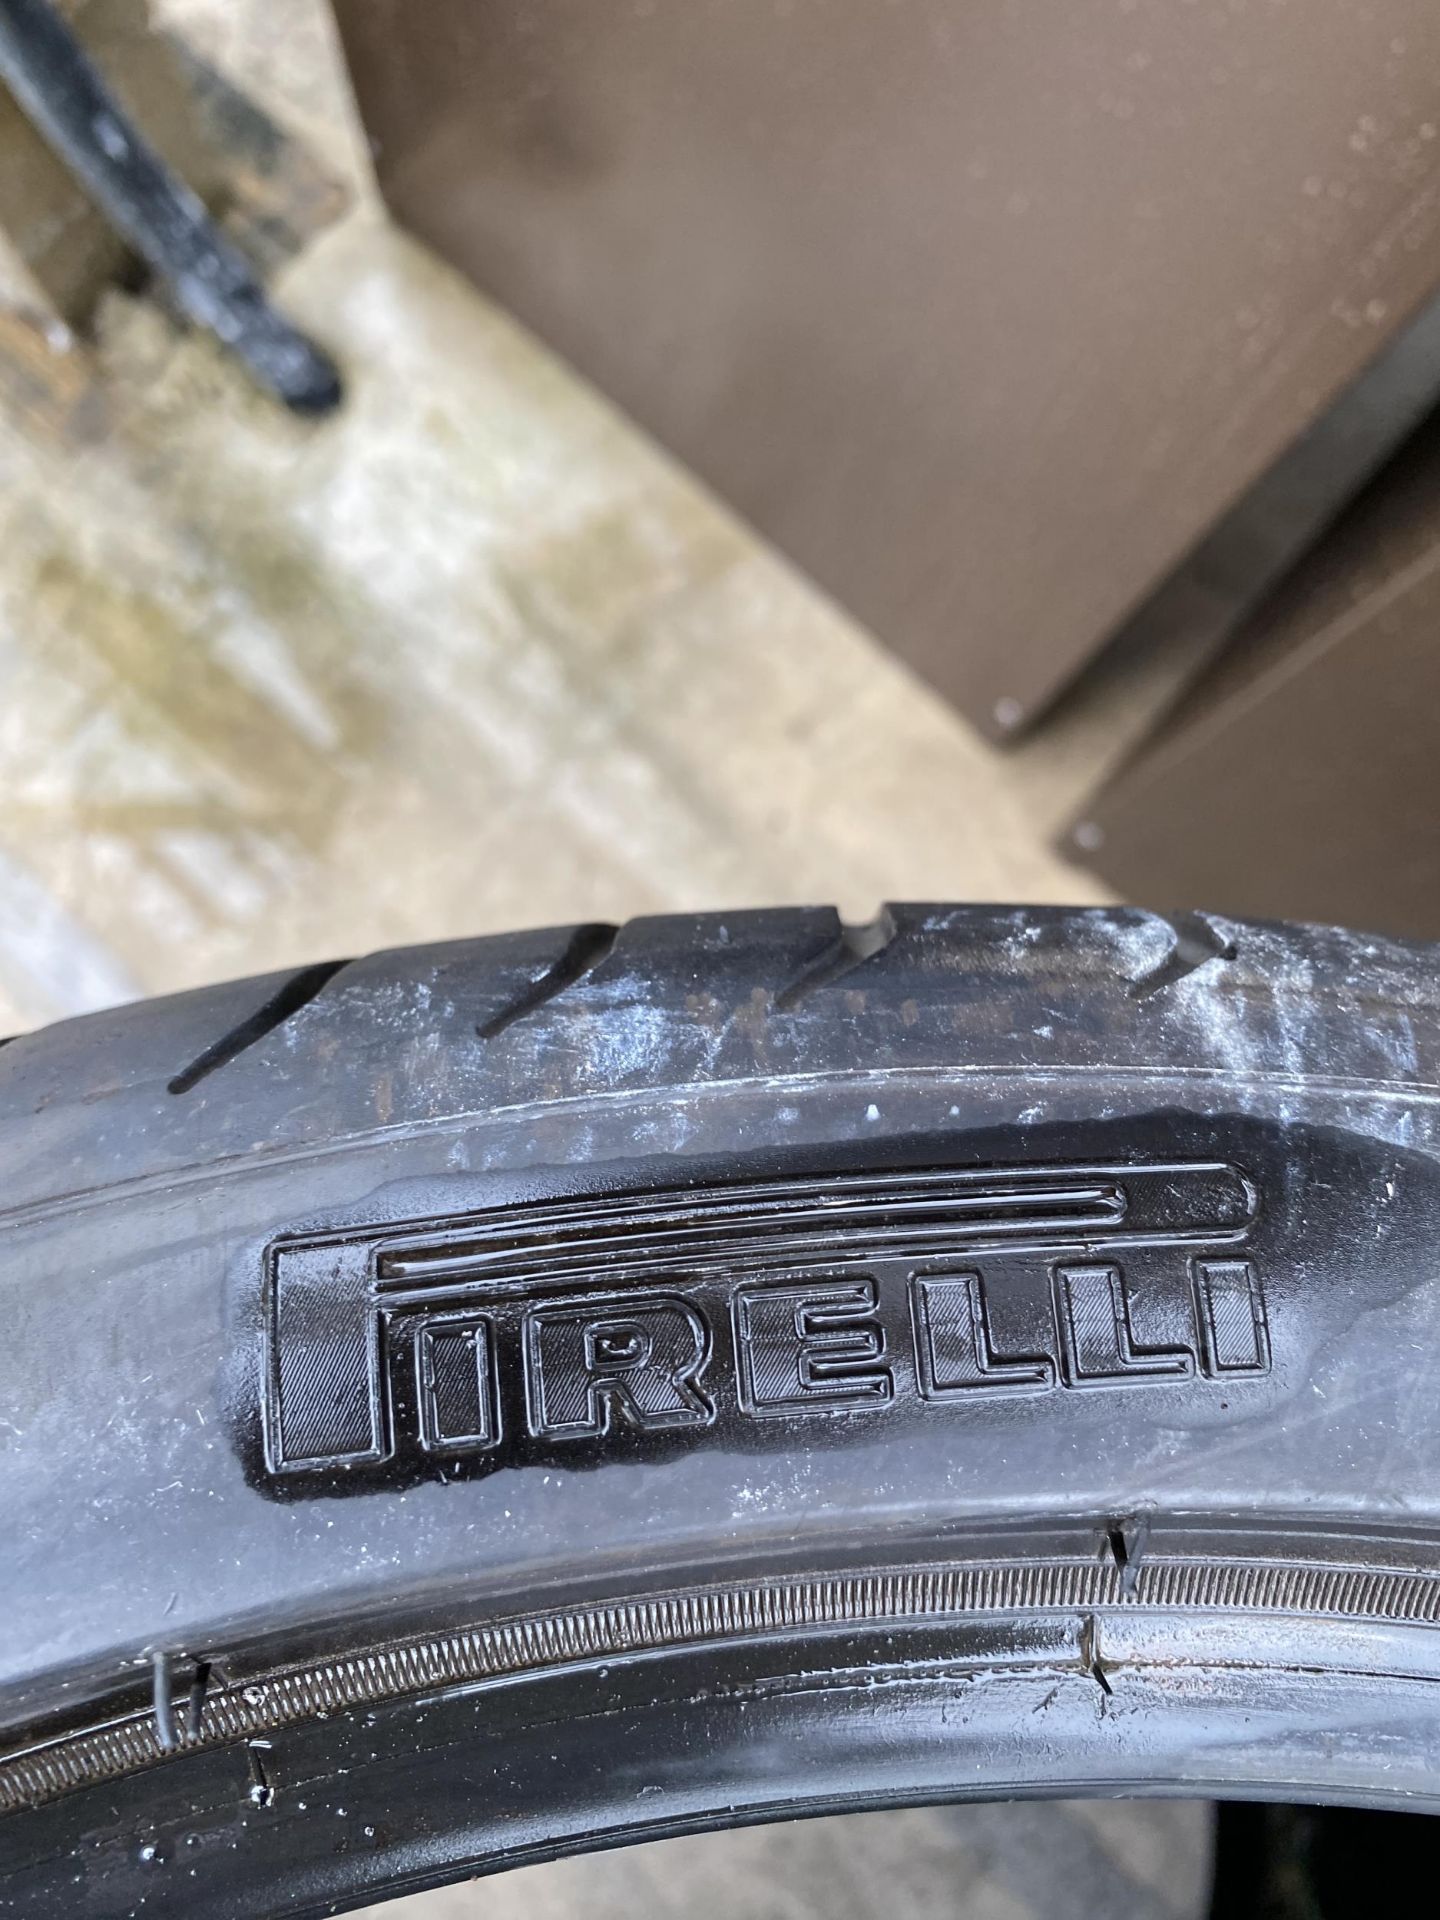 TWO PART WORN PIRELLI 295/30 ZR19 LOW PROFILE TYRES - Image 3 of 4